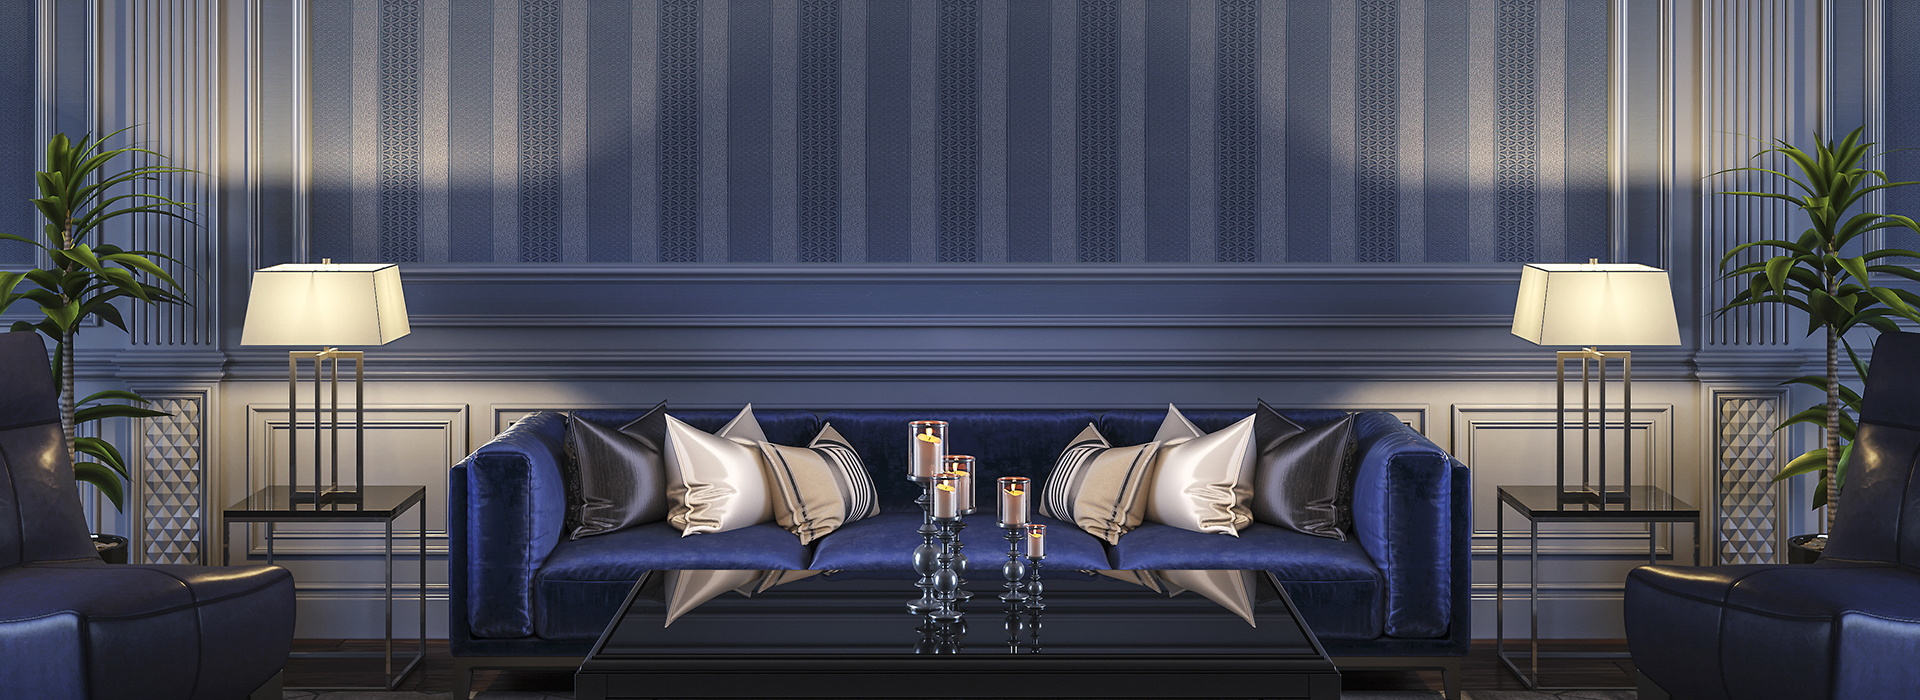 Art Deco style sitting area with a wall flushed centered blue silk couch, end tables with matching lamps on each end, glossy black rectangle coffee table in the middle and side leather seats with blue vertical stripe wallpaper with moulding accents